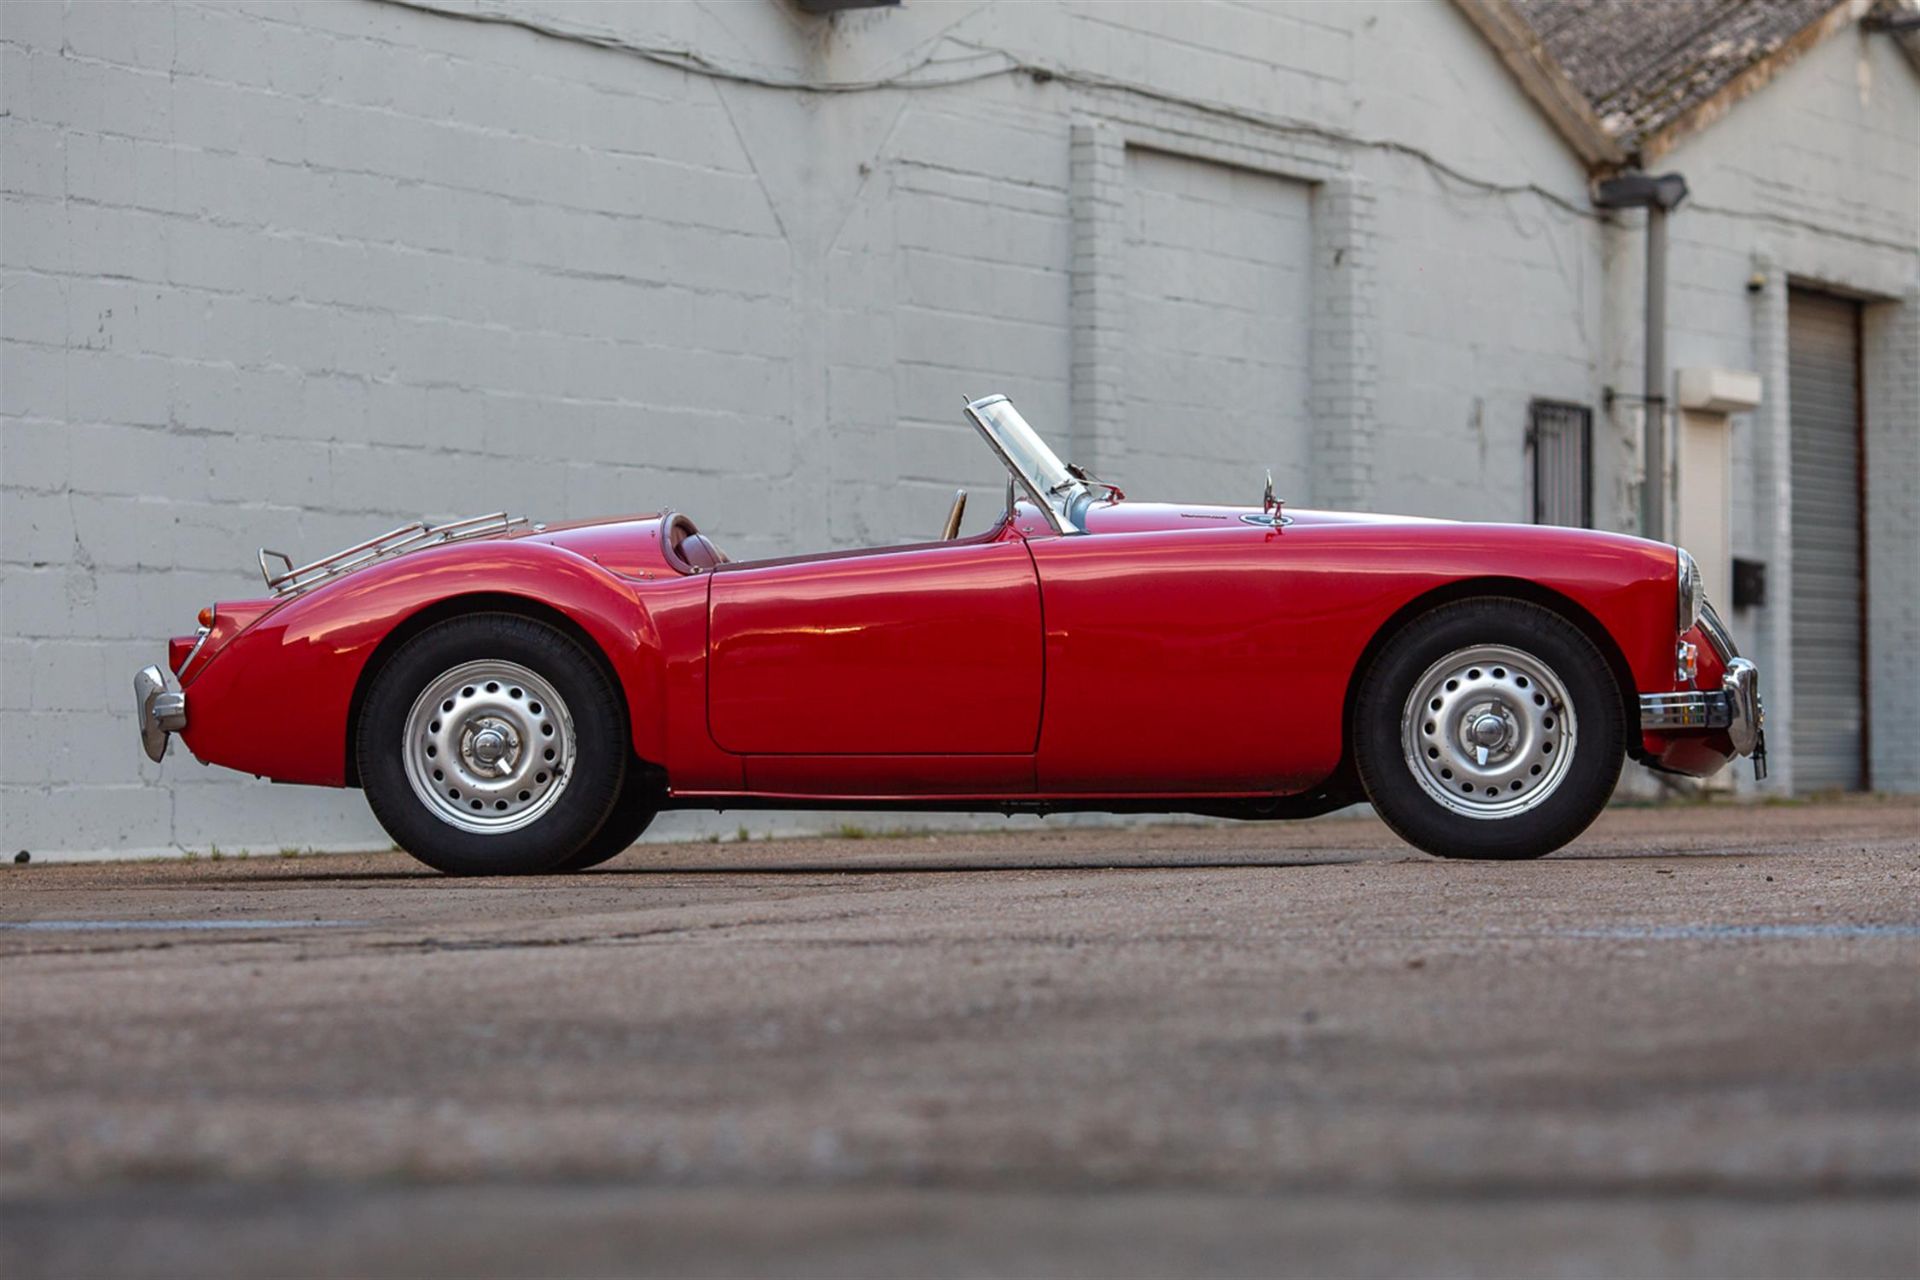 1960 MG A Twin Cam Roadster - Image 5 of 10